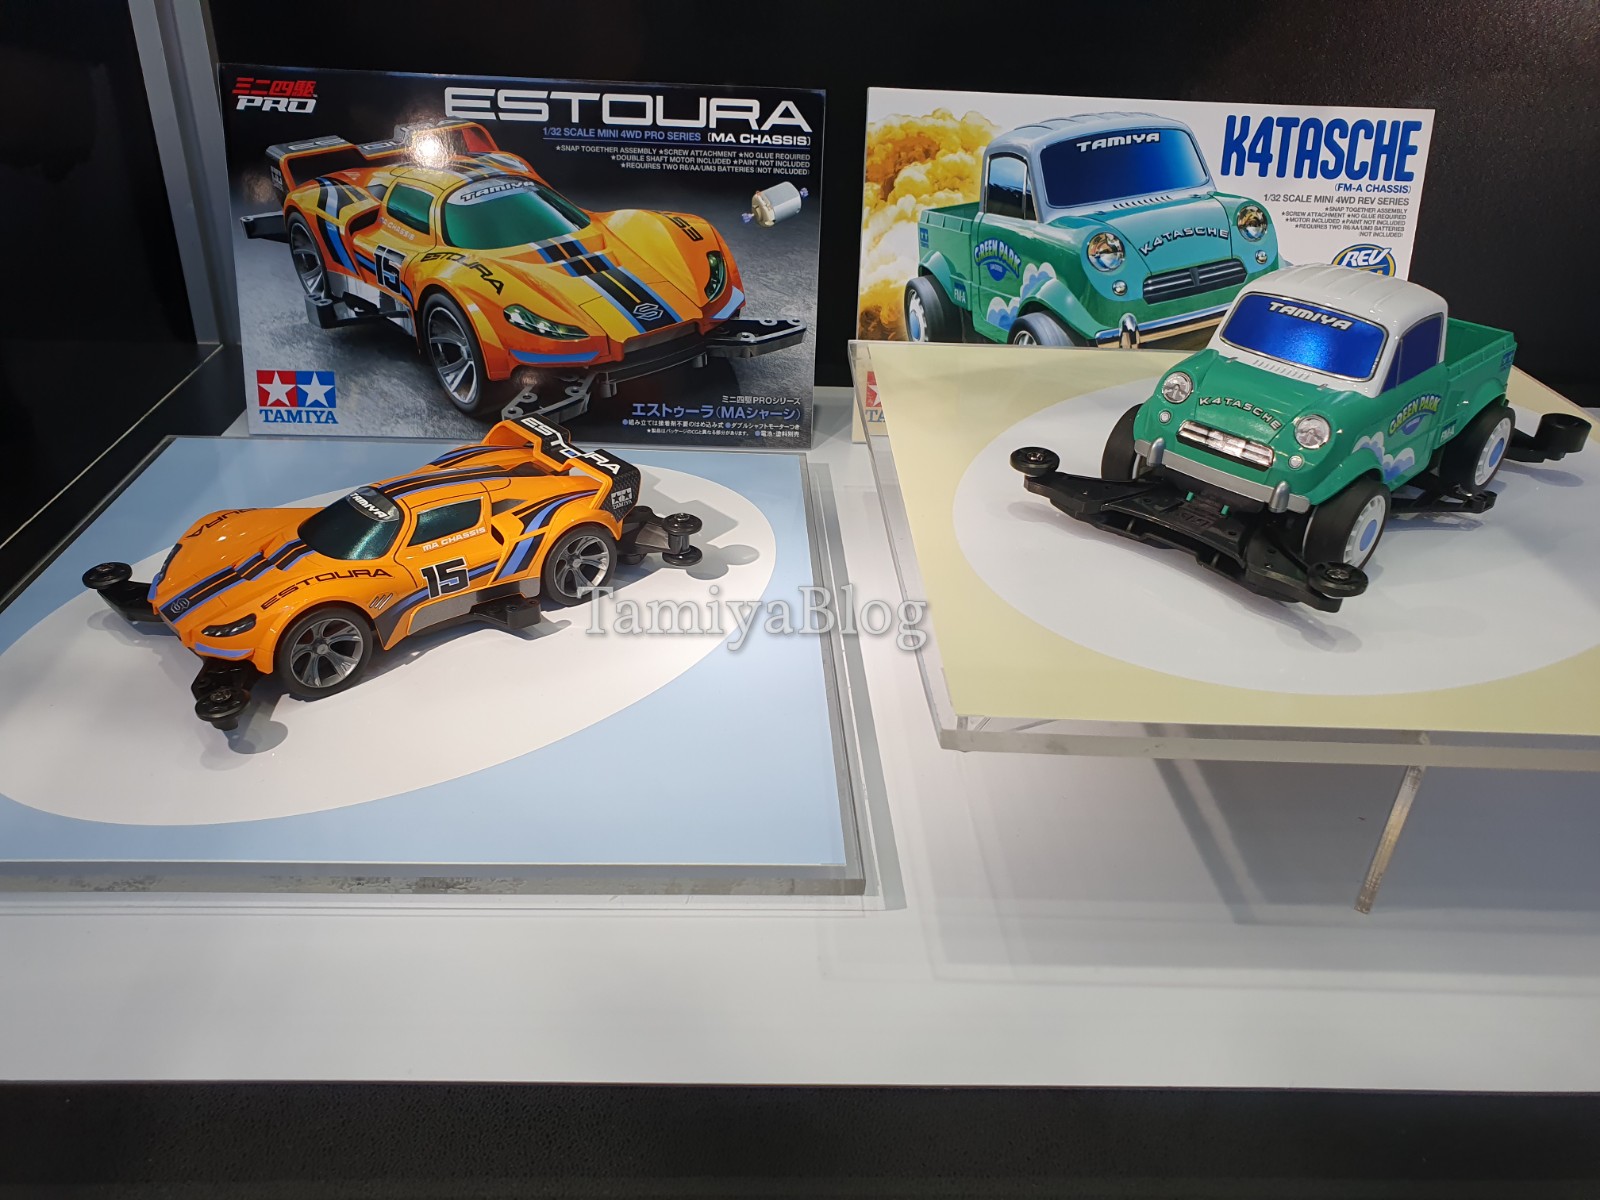 New Tamiya Mini 4WD and Educational series shown at the Nuremberg Toy